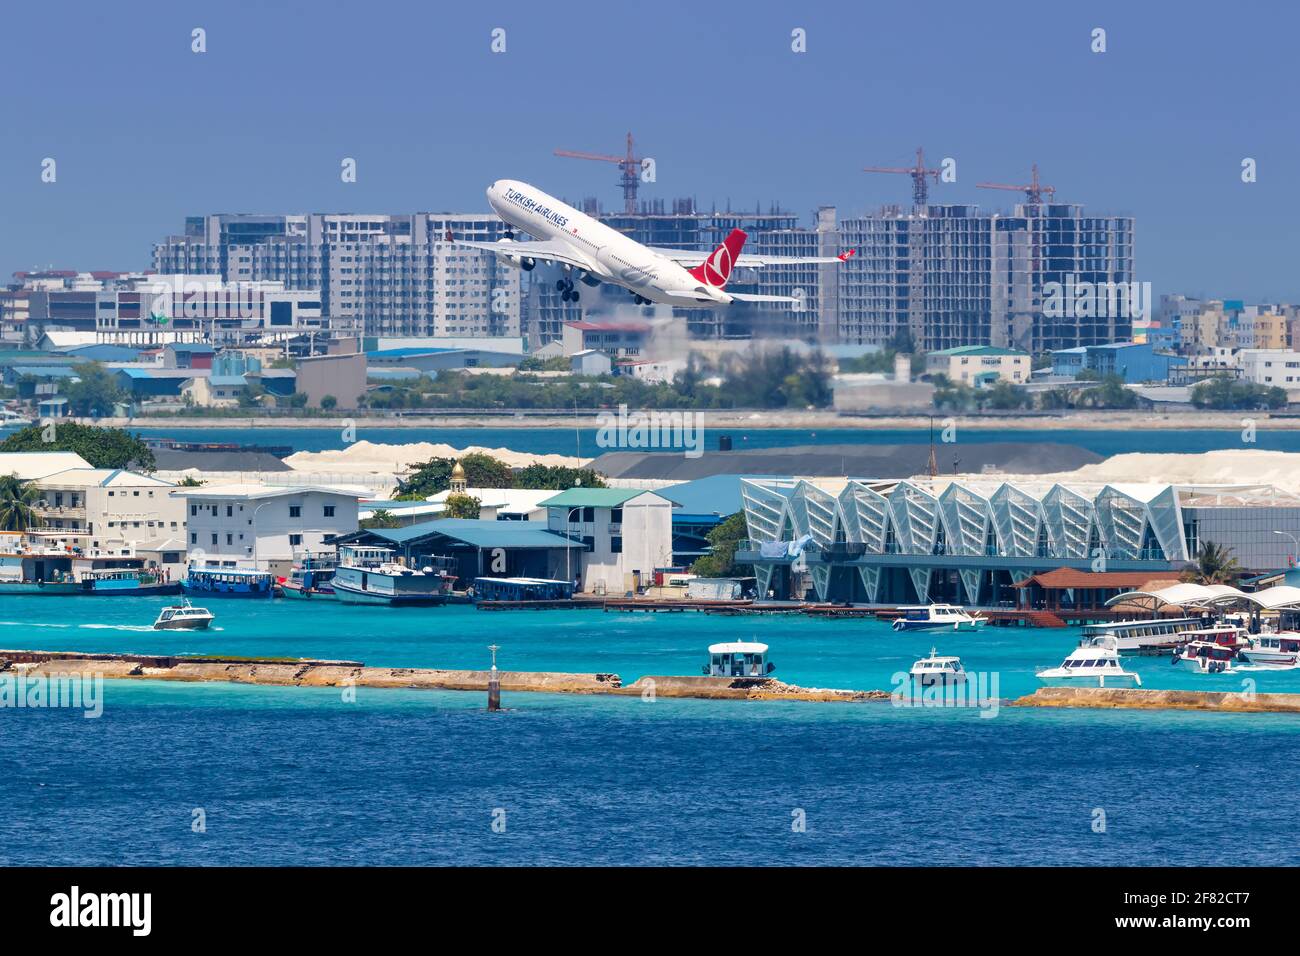 Male, Maldives – February 18, 2018: Turkish Airlines Airbus A330 airplane at Male airport (MLE) in the Maldives. Stock Photo